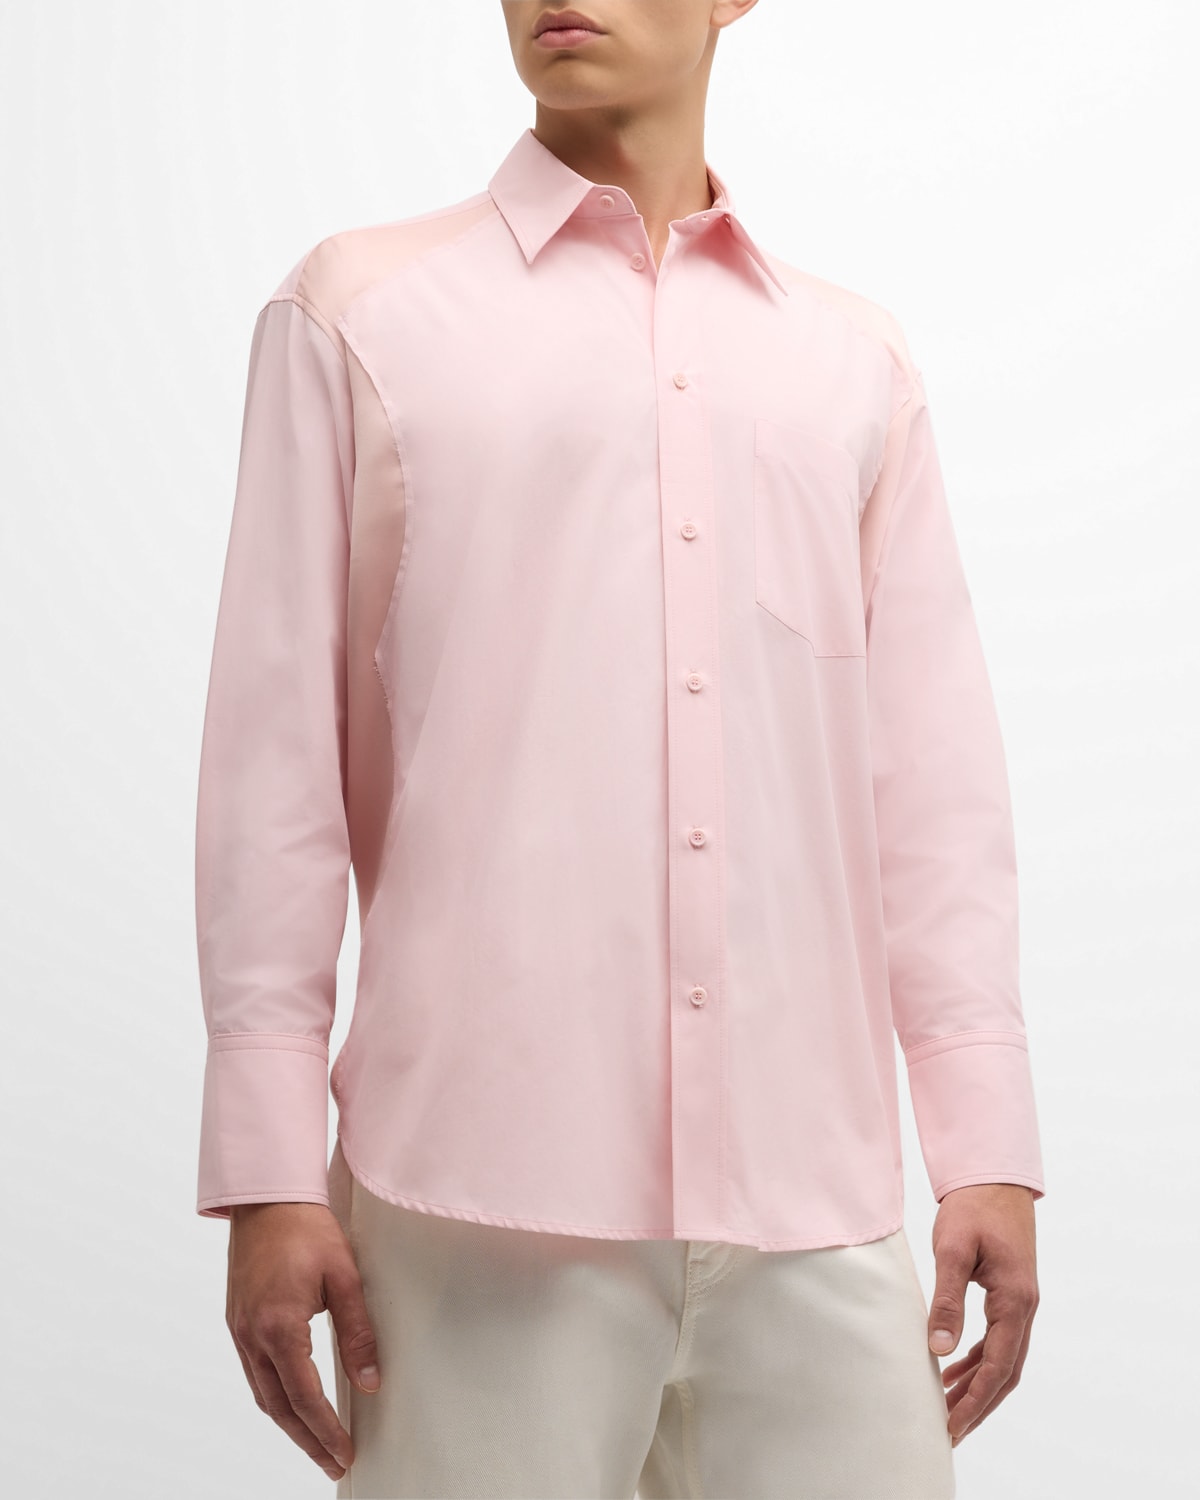 Shop Jw Anderson Men's Sport Shirt With Satin Inserts In Rose Pink